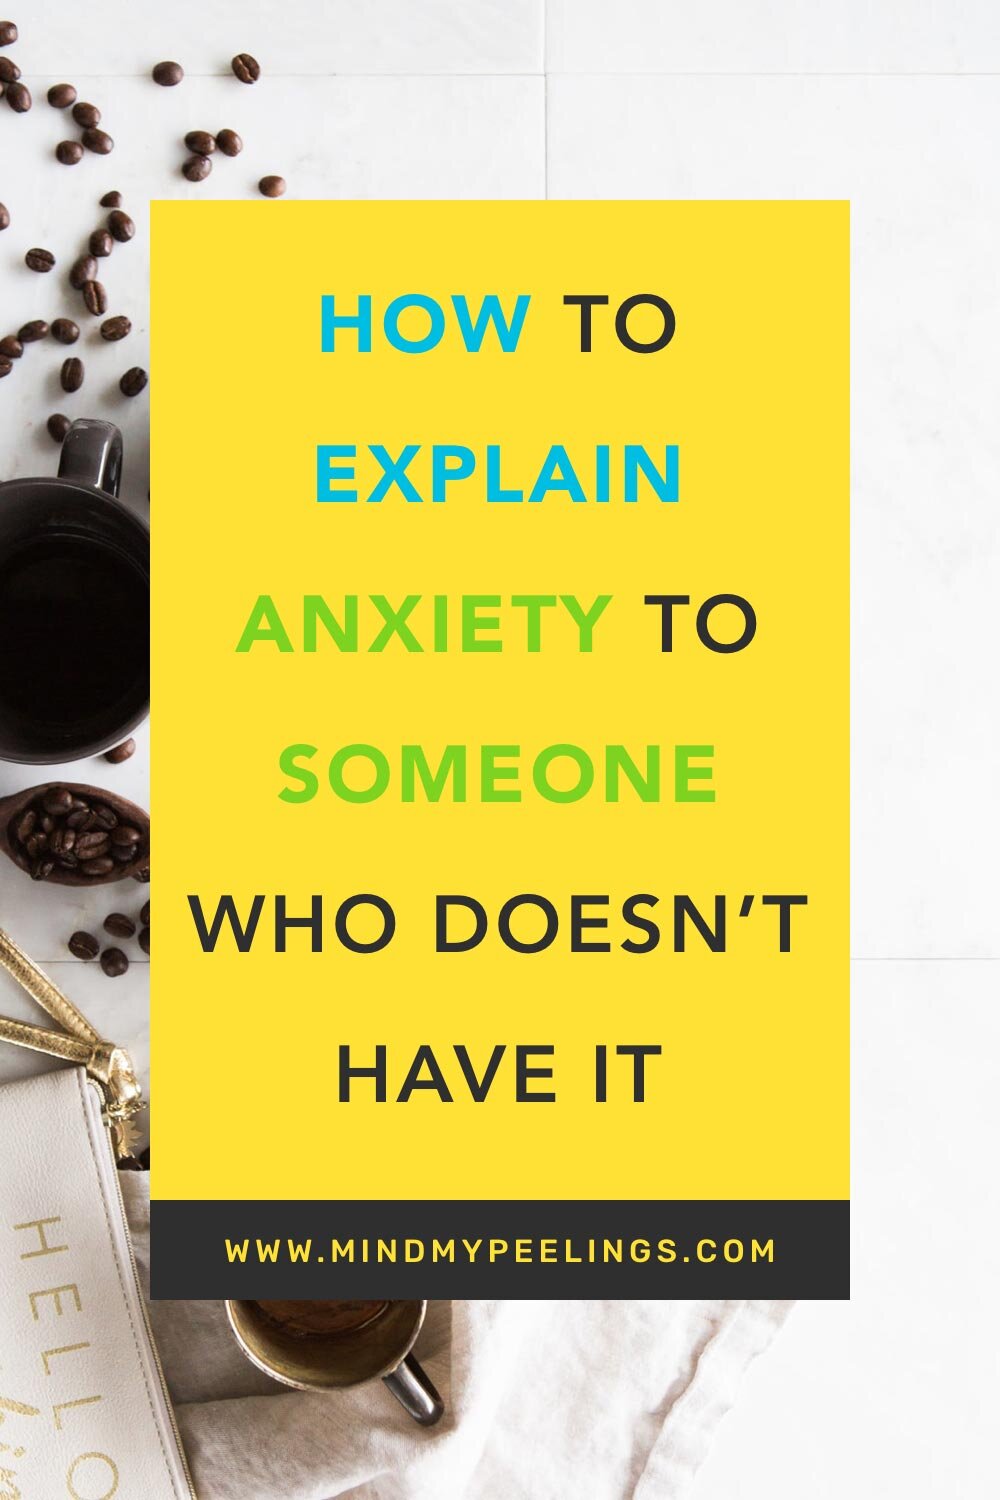 How To Explain Anxiety To Someone — Mind My Peelings